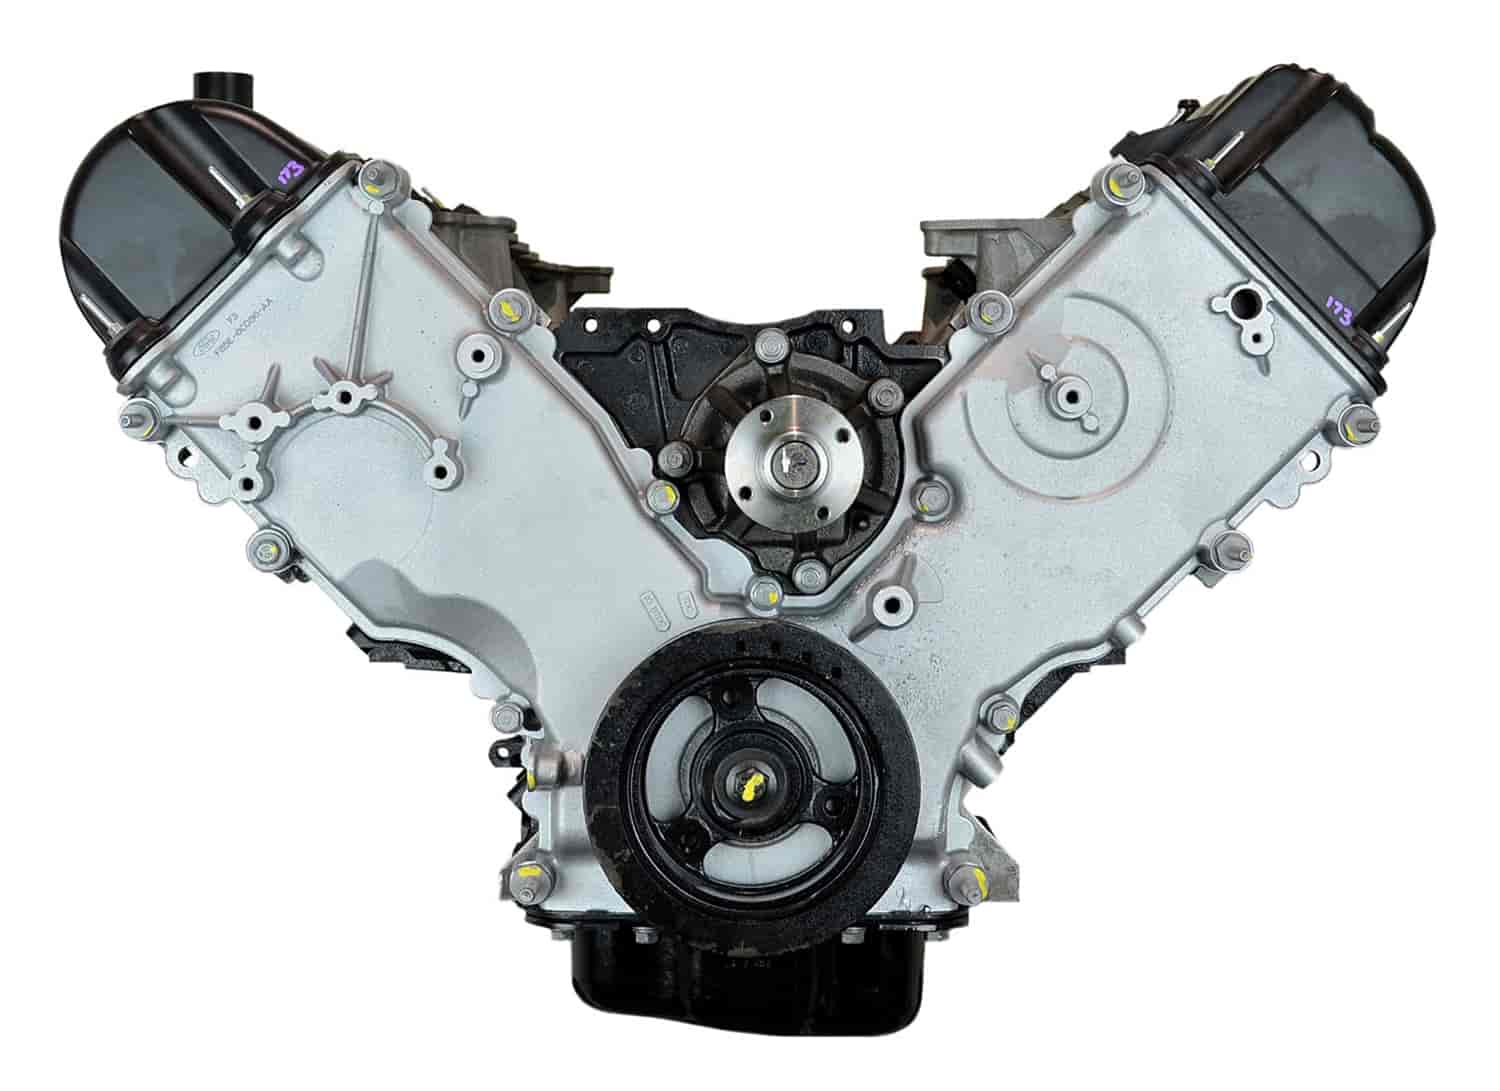 Remanufactured Crate Engine for 1997-1999 Ford E-Series Van with 6.8L V10